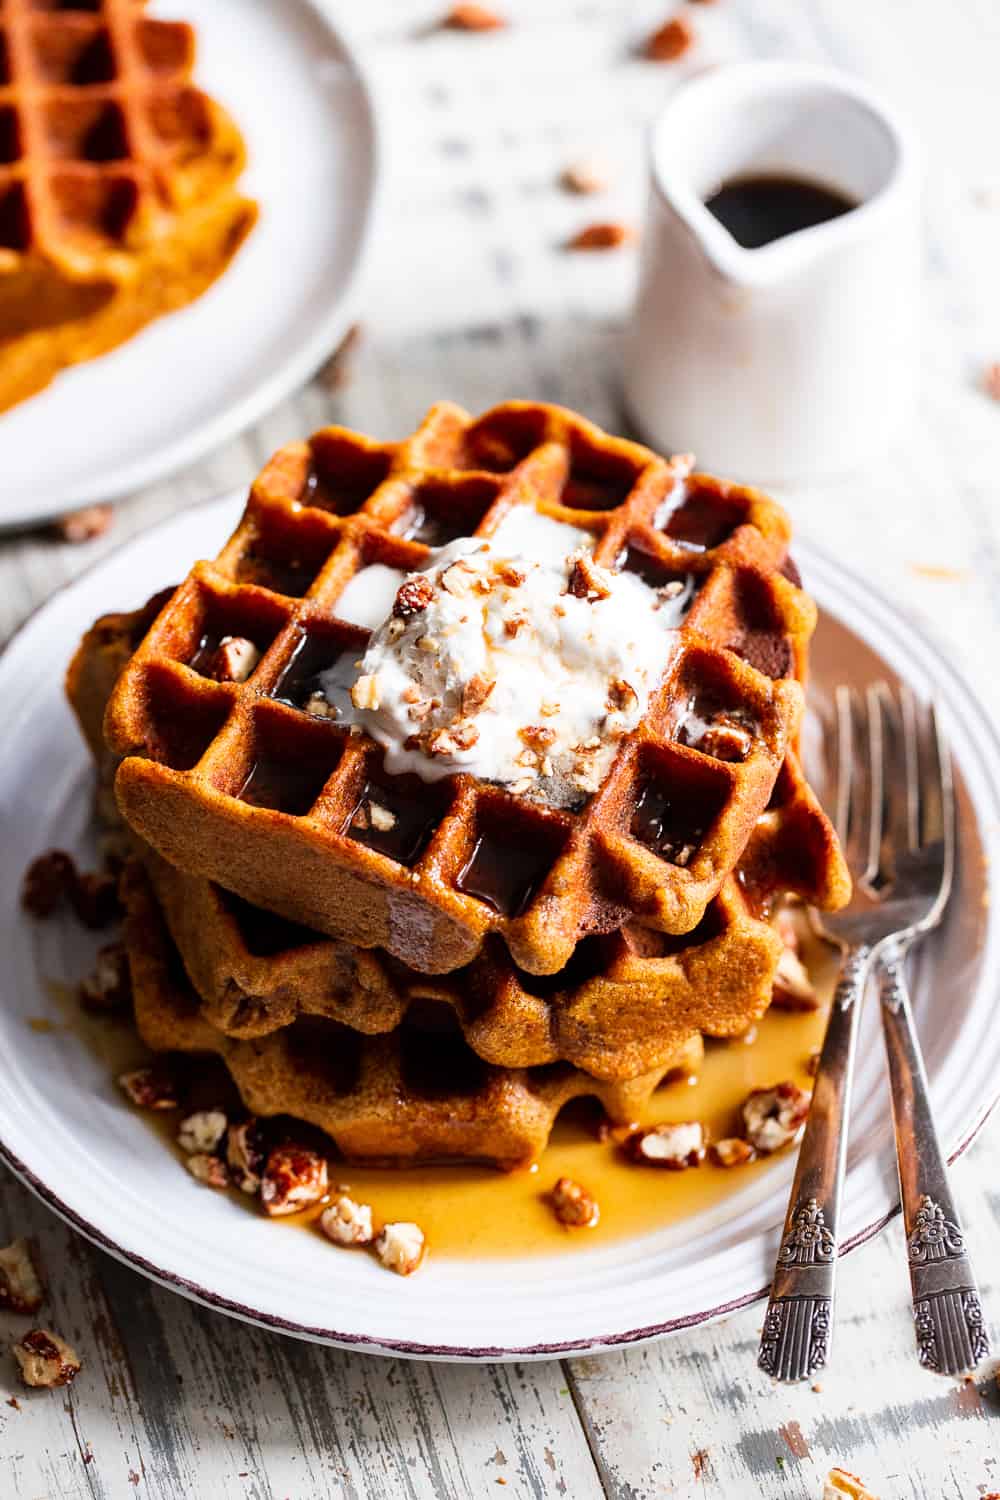 These Paleo Pumpkin Waffles are crisp on the outside, soft inside and filled with warm fall spices. They’re just sweet enough to enjoy alone or you can top with all your favorites like maple syrup, coconut whipped cream and chopped pecans. They’re kid approved and freeze well so you can enjoy one on the go! Gluten free, dairy free. #paleo #pumpkin #cleaneating #waffles #glutenfree